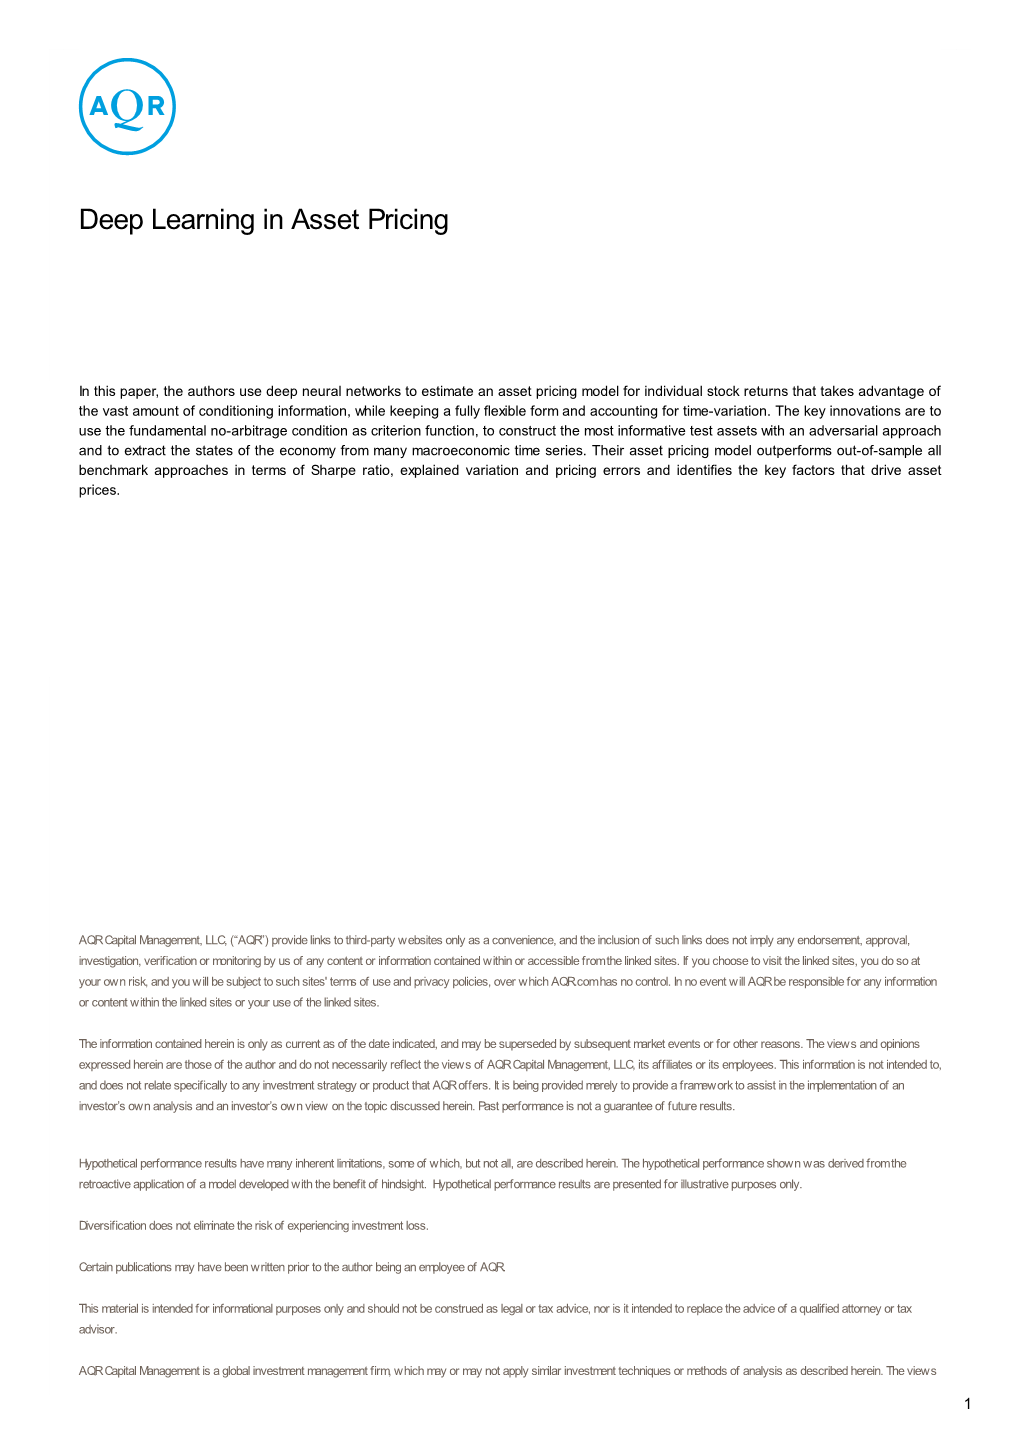 Deep Learning in Asset Pricing